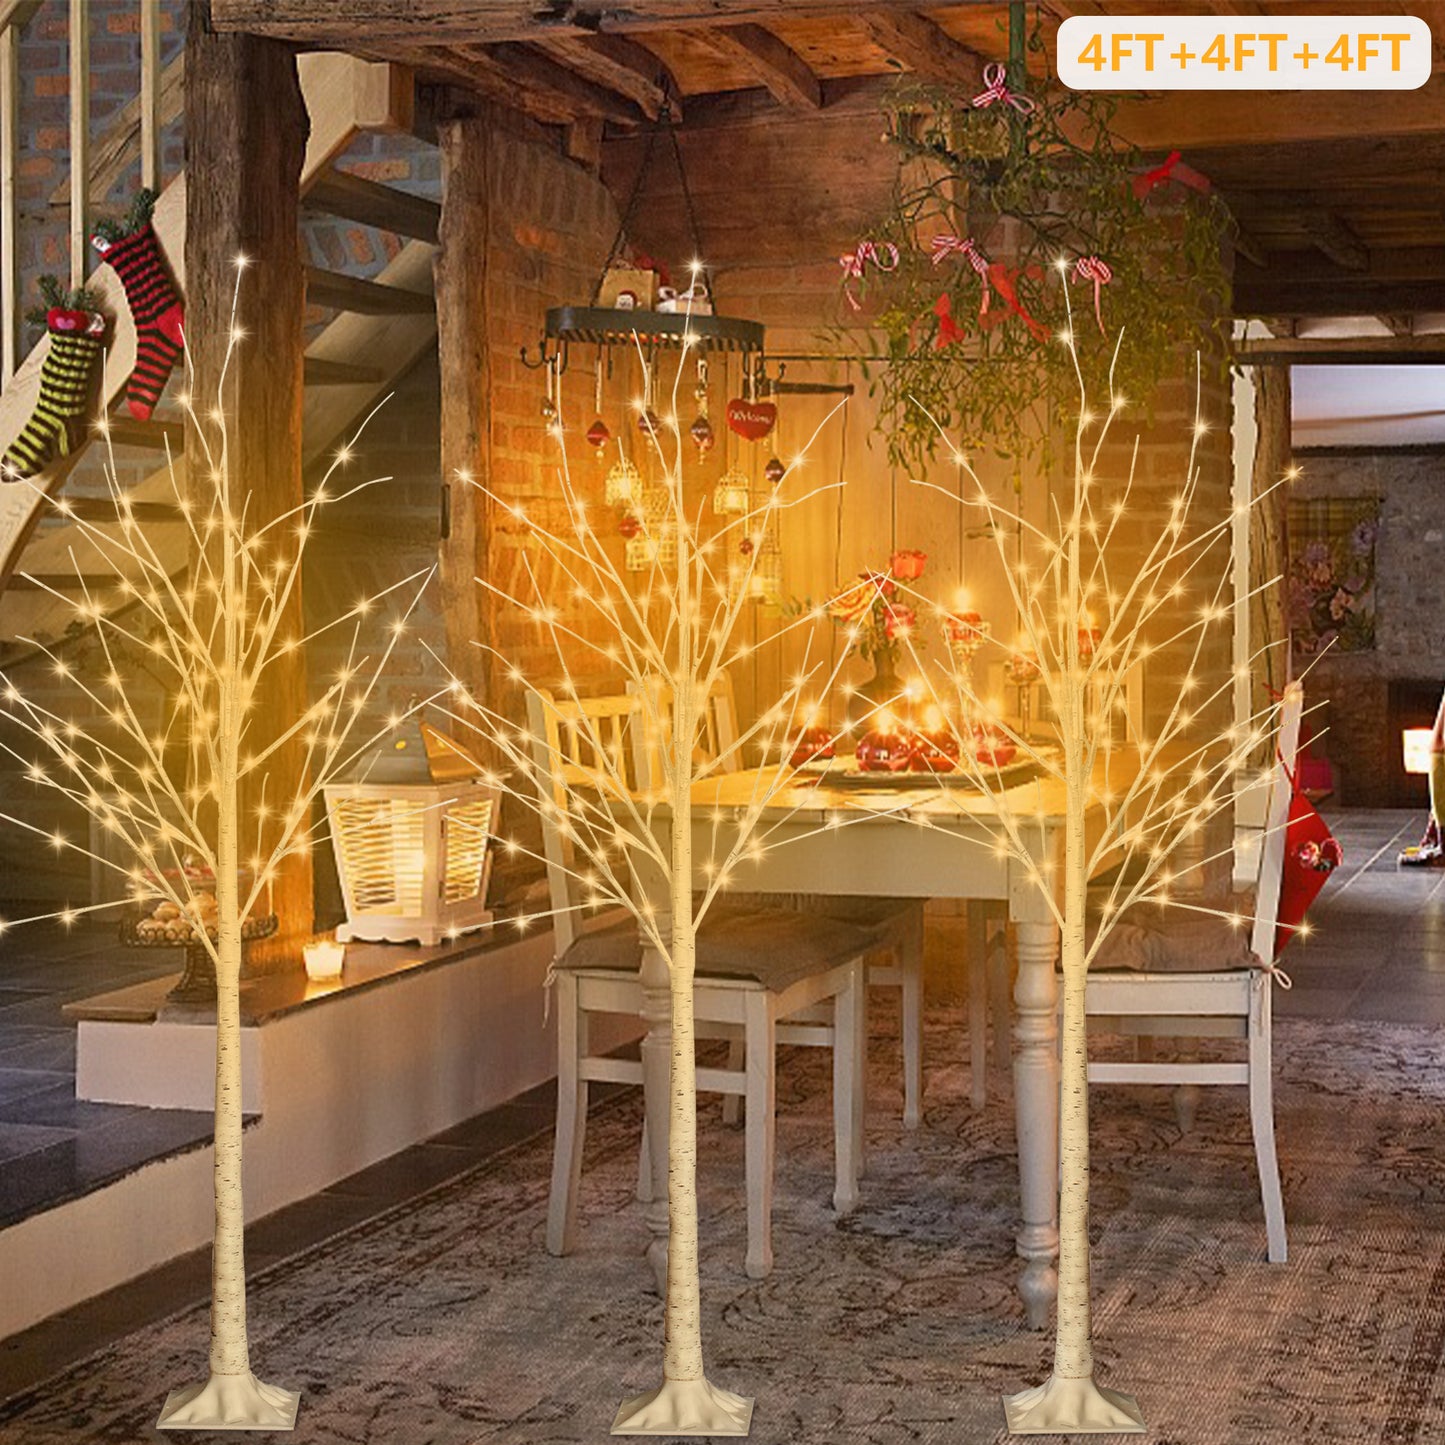 Lighted Birch Trees with LED Fairy Lights, 4ft Christmas Trees Set of 3, White Birch Tree for Christmas Decoration, Indoor and Outdoor, Garden, Festival Party Use, Warm White, D4013